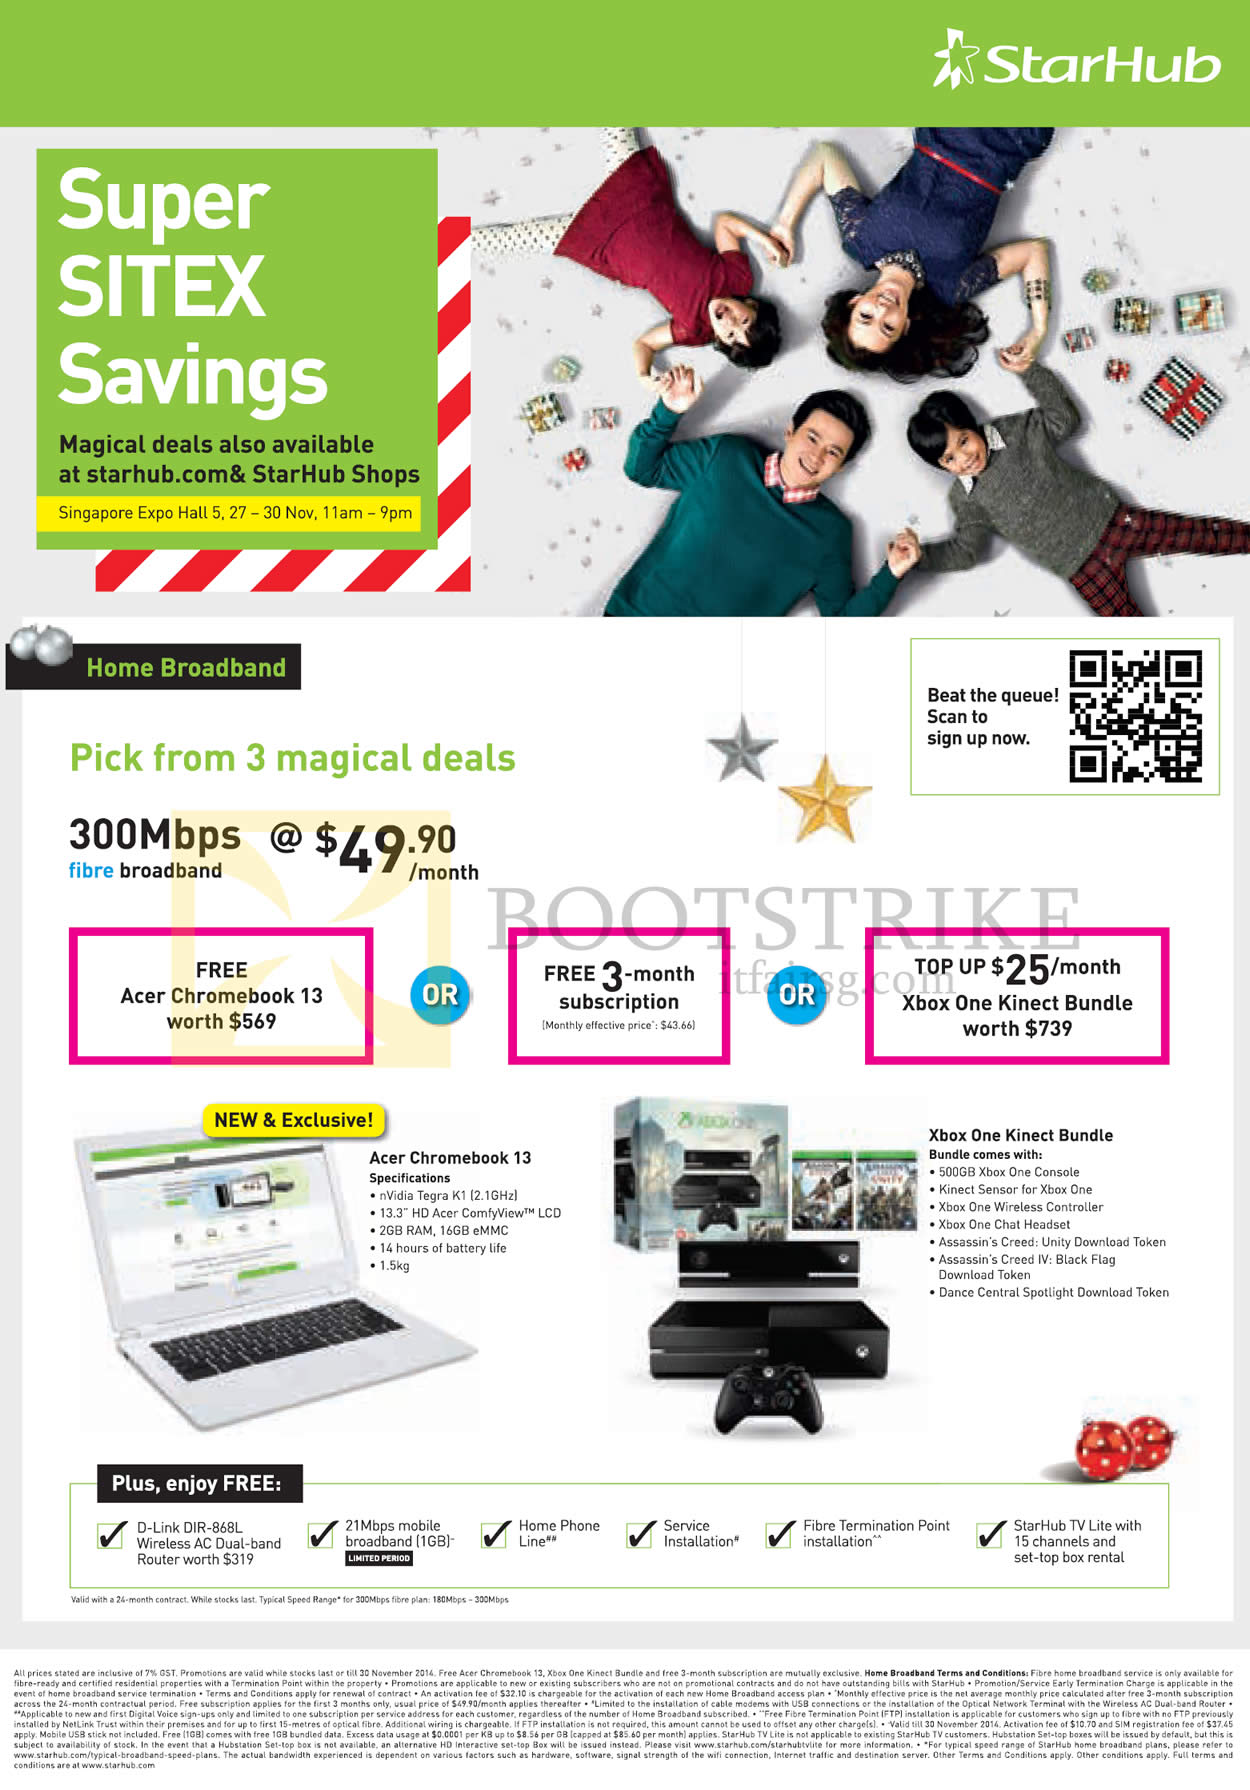 Featured image for StarHub SITEX 2014 Smartphones, Tablets, Cable TV & Broadband Offers 27 - 30 Nov 2014